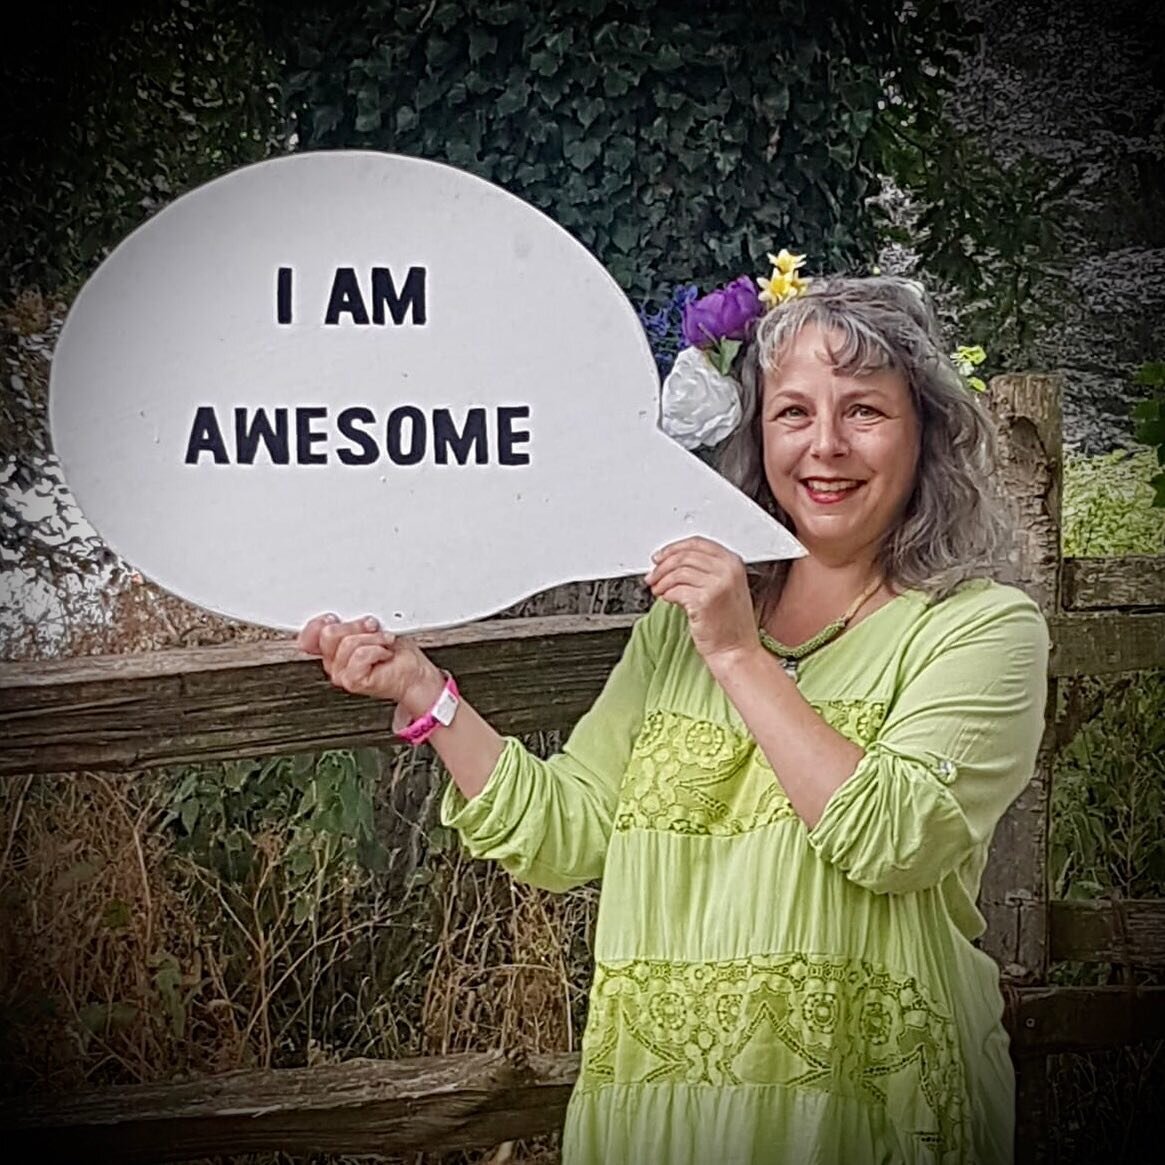 For anyone in any doubt about their skills and abilities just now, repeat after me&hellip;

And if you have to paint the words &ldquo;I am awesome&rdquo; 😎 on a big wooden sign and take an uplifting selfie as a reminder ~ so be it!

Am I right, or a